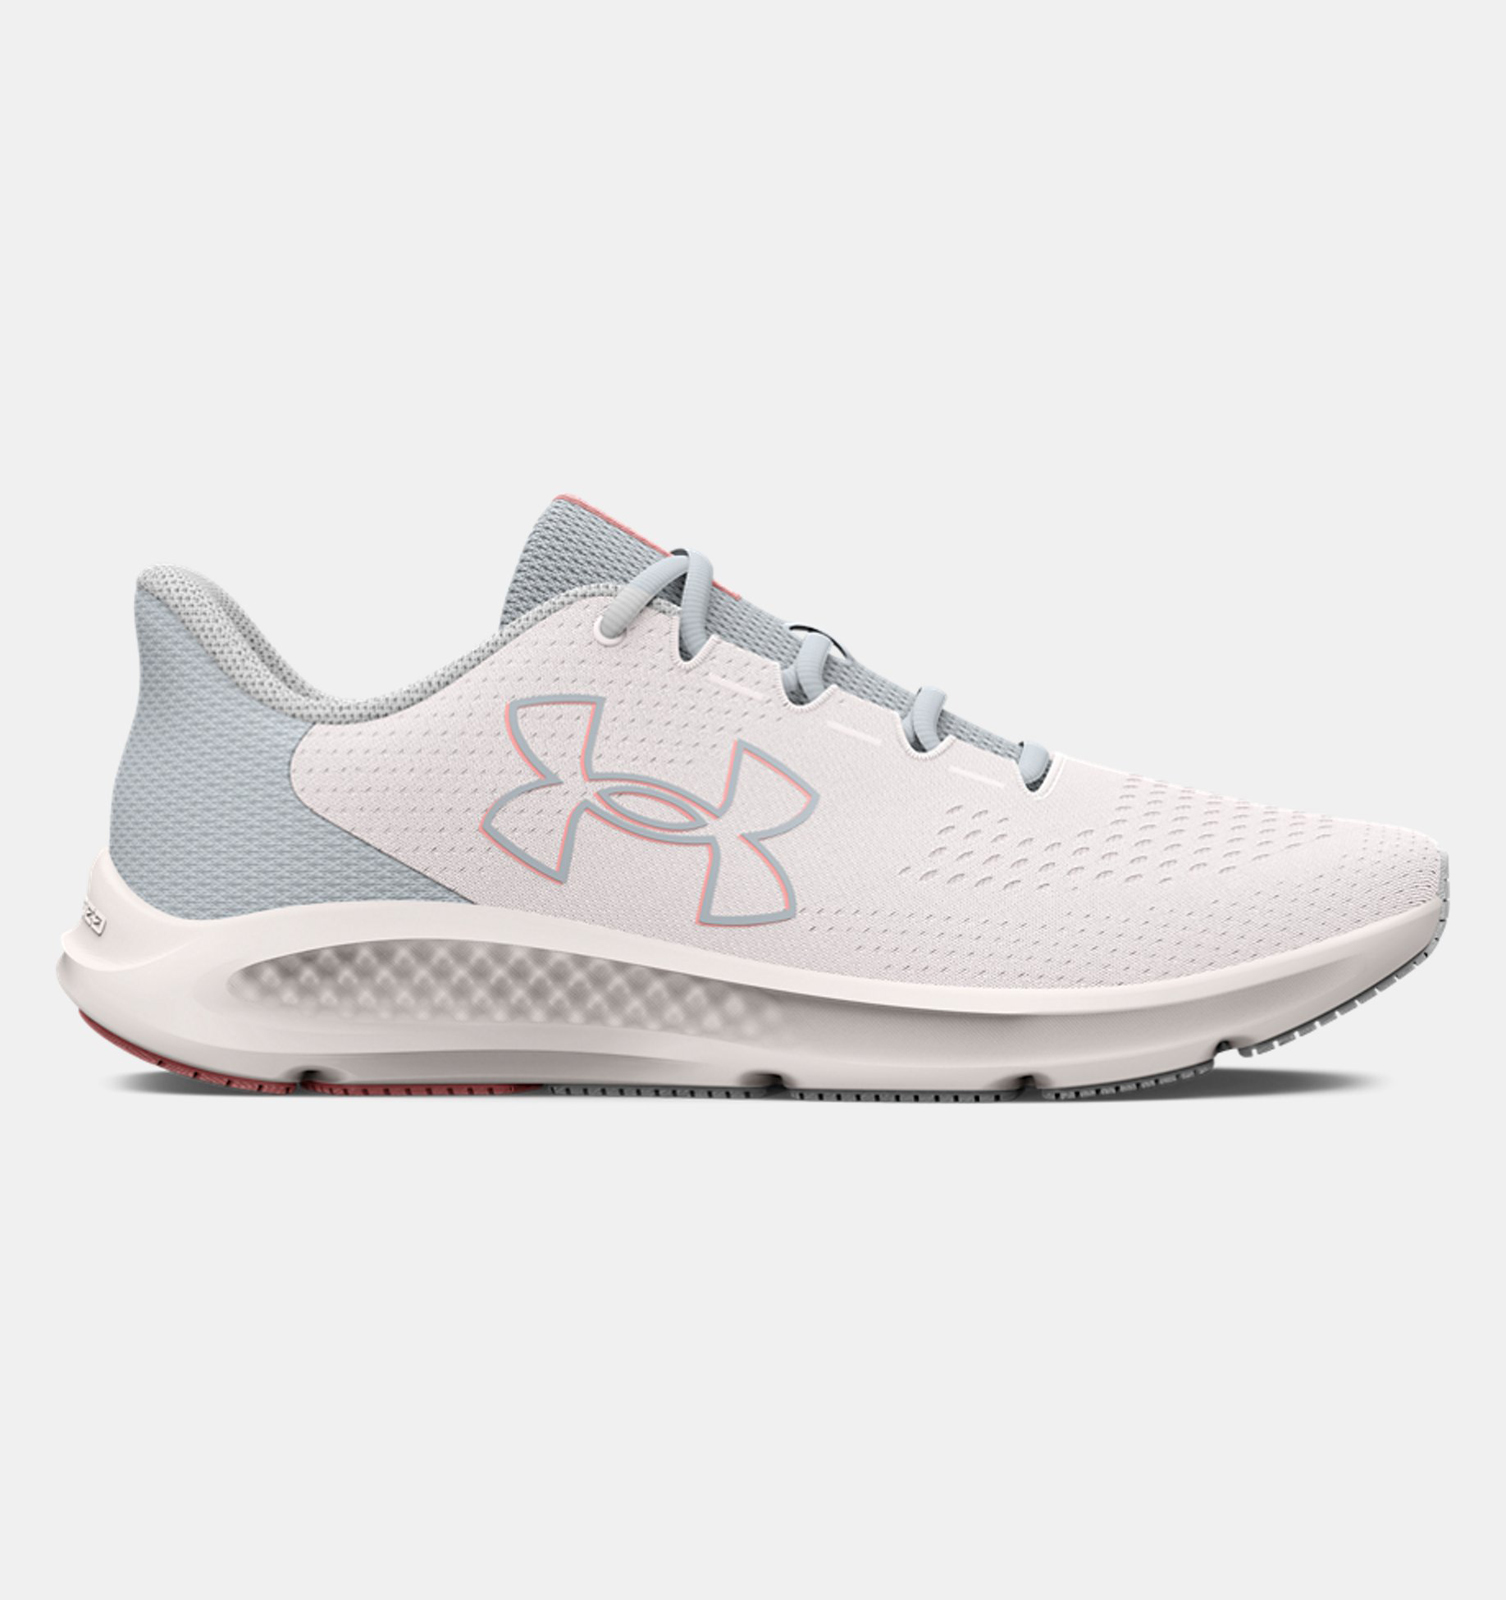 Under Armour - Women's UA Charged Pursuit 3 Big Logo Running Shoes - White/Halo Gray/Pink Fizz Γυναικεία > Παπούτσια > Αθλητικά > Παπούτσι Low Cut